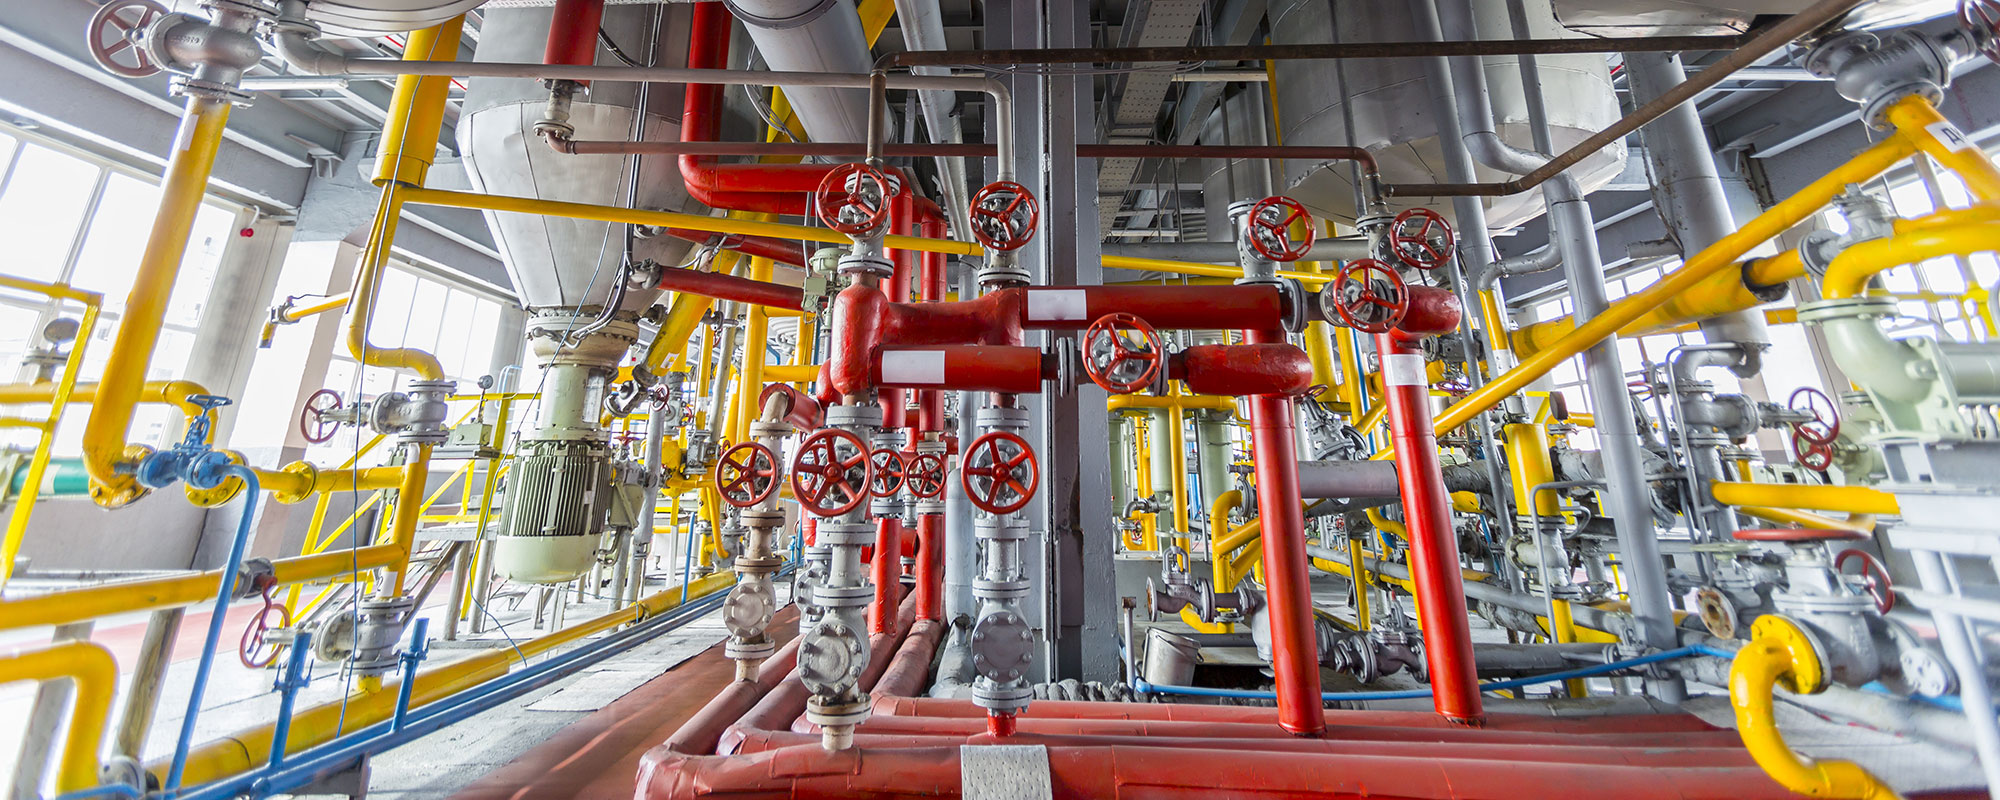 Red, yellow, and silver piping in an indoor industrial setting.